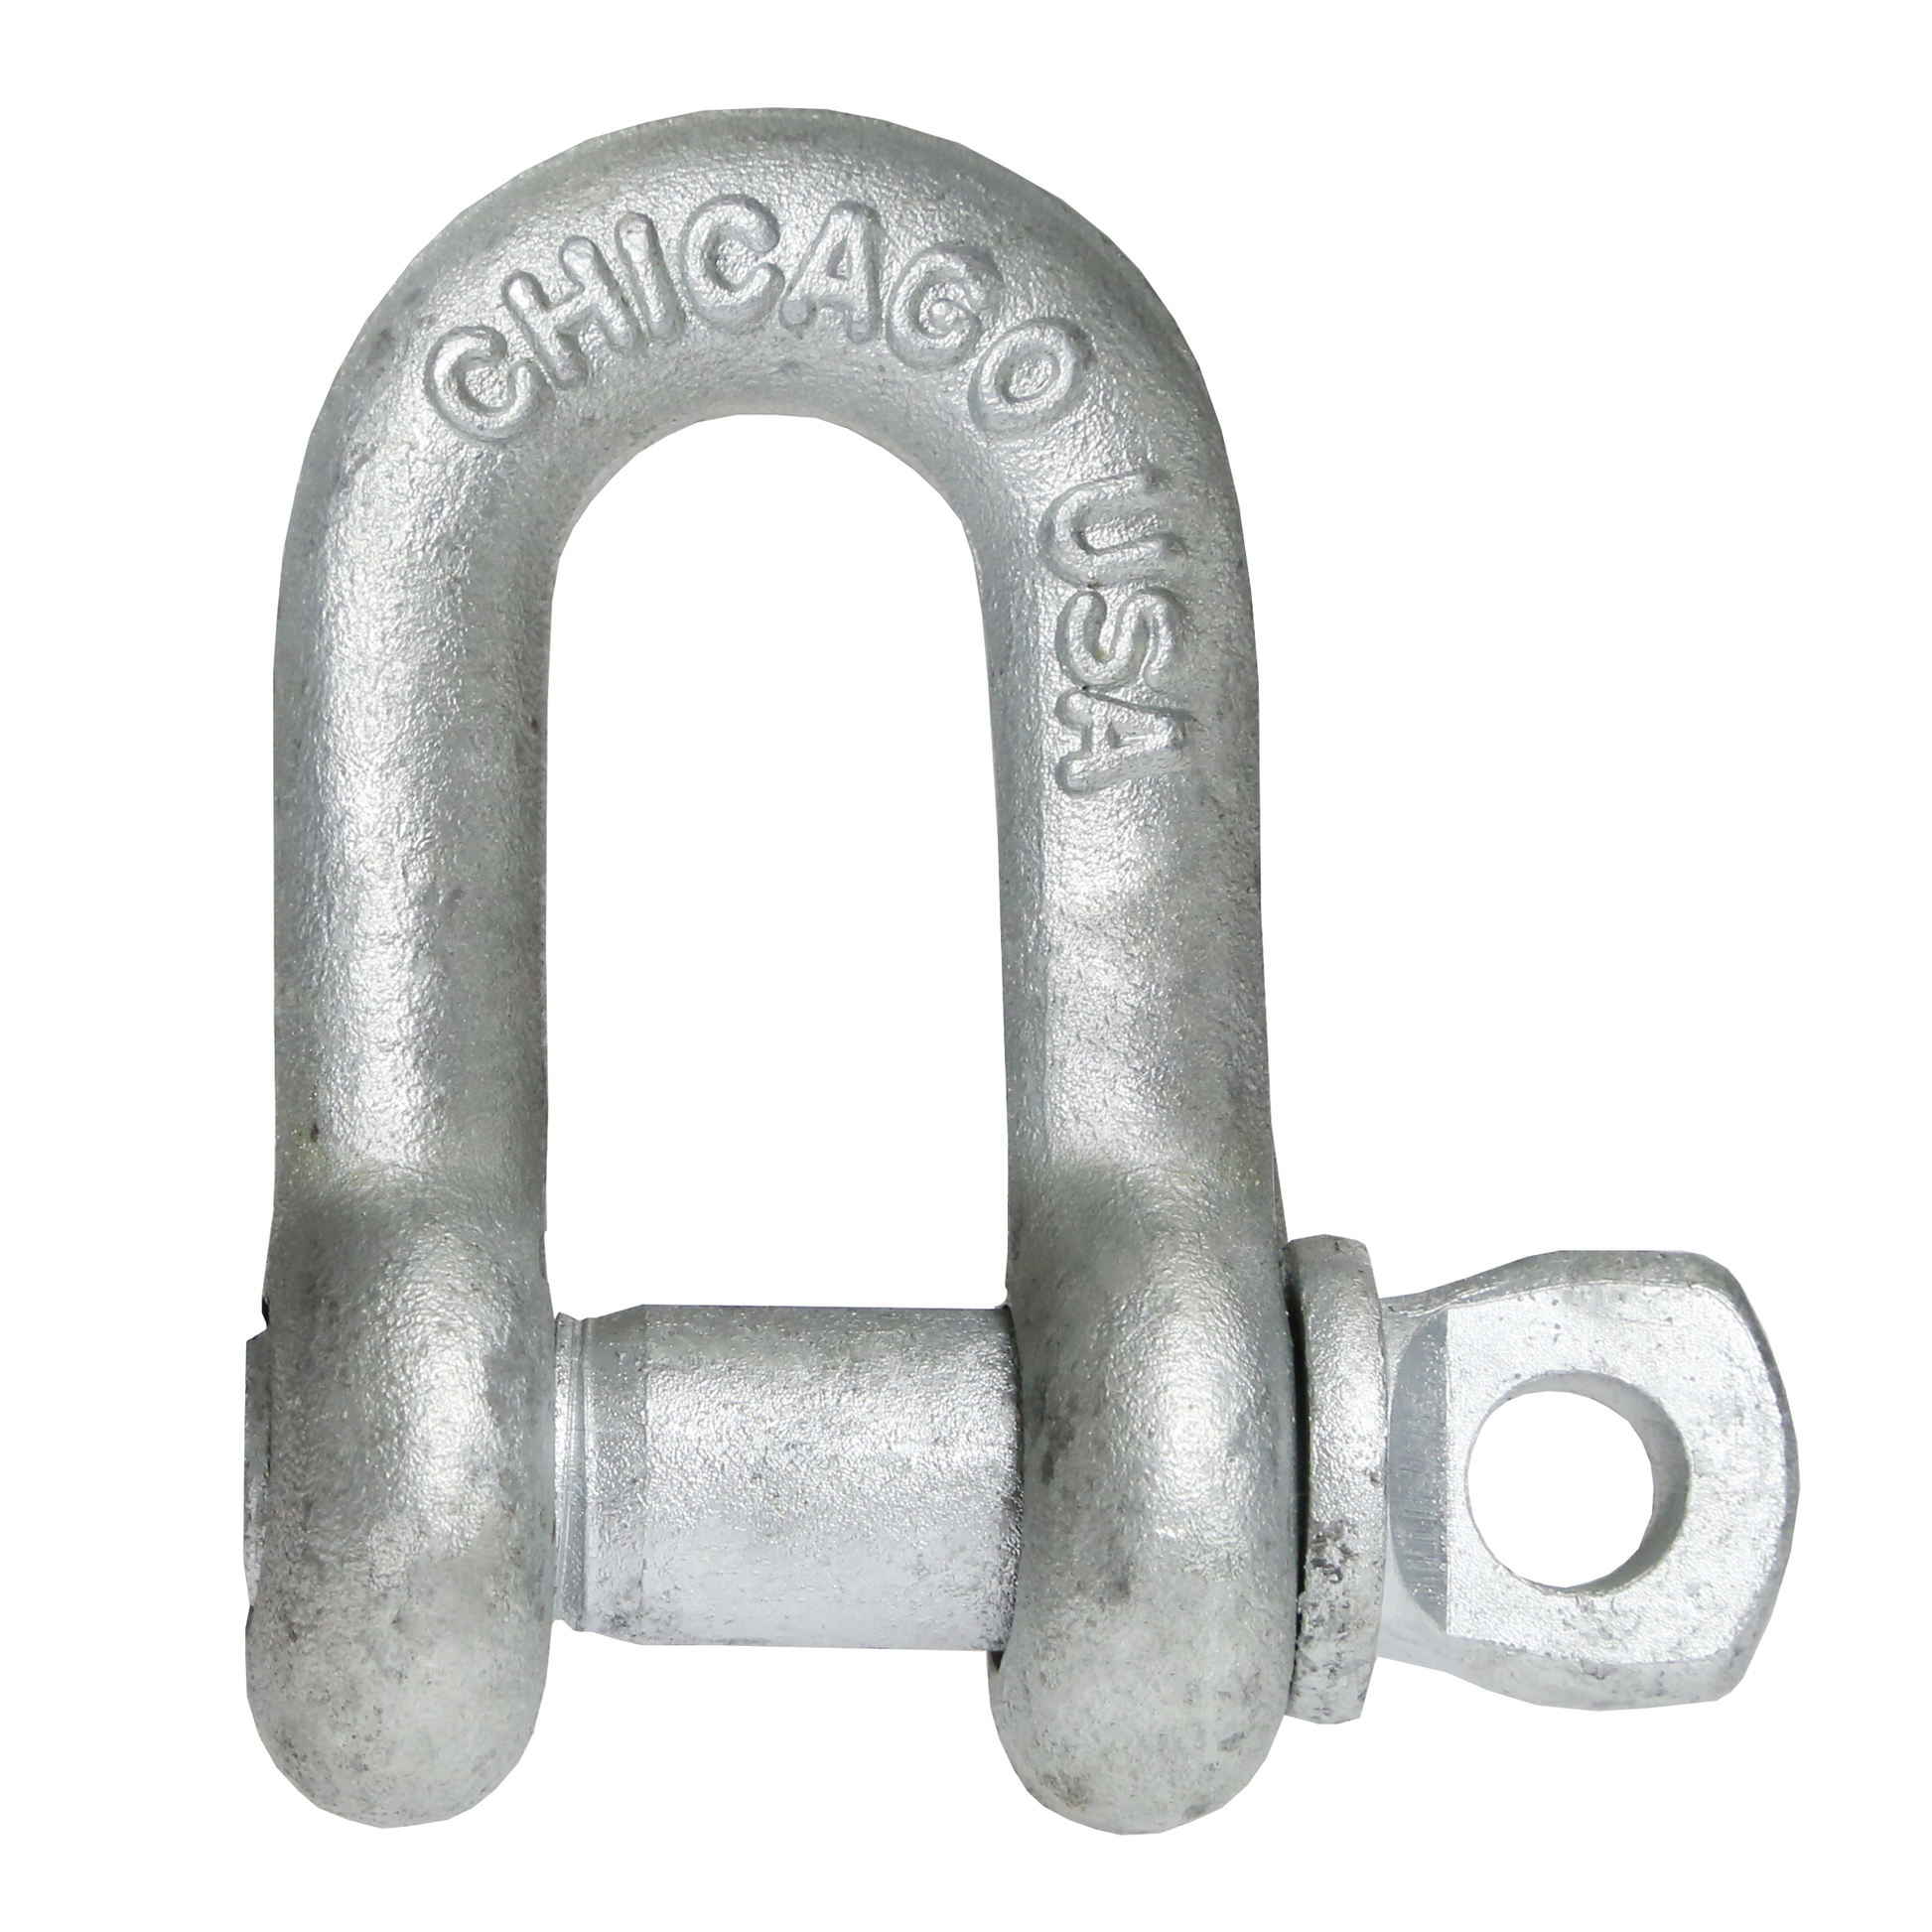 Screw Pin Chain Shackle - Chicago Hardware - 3/8" Galvanized Steel - 1 Ton primary image